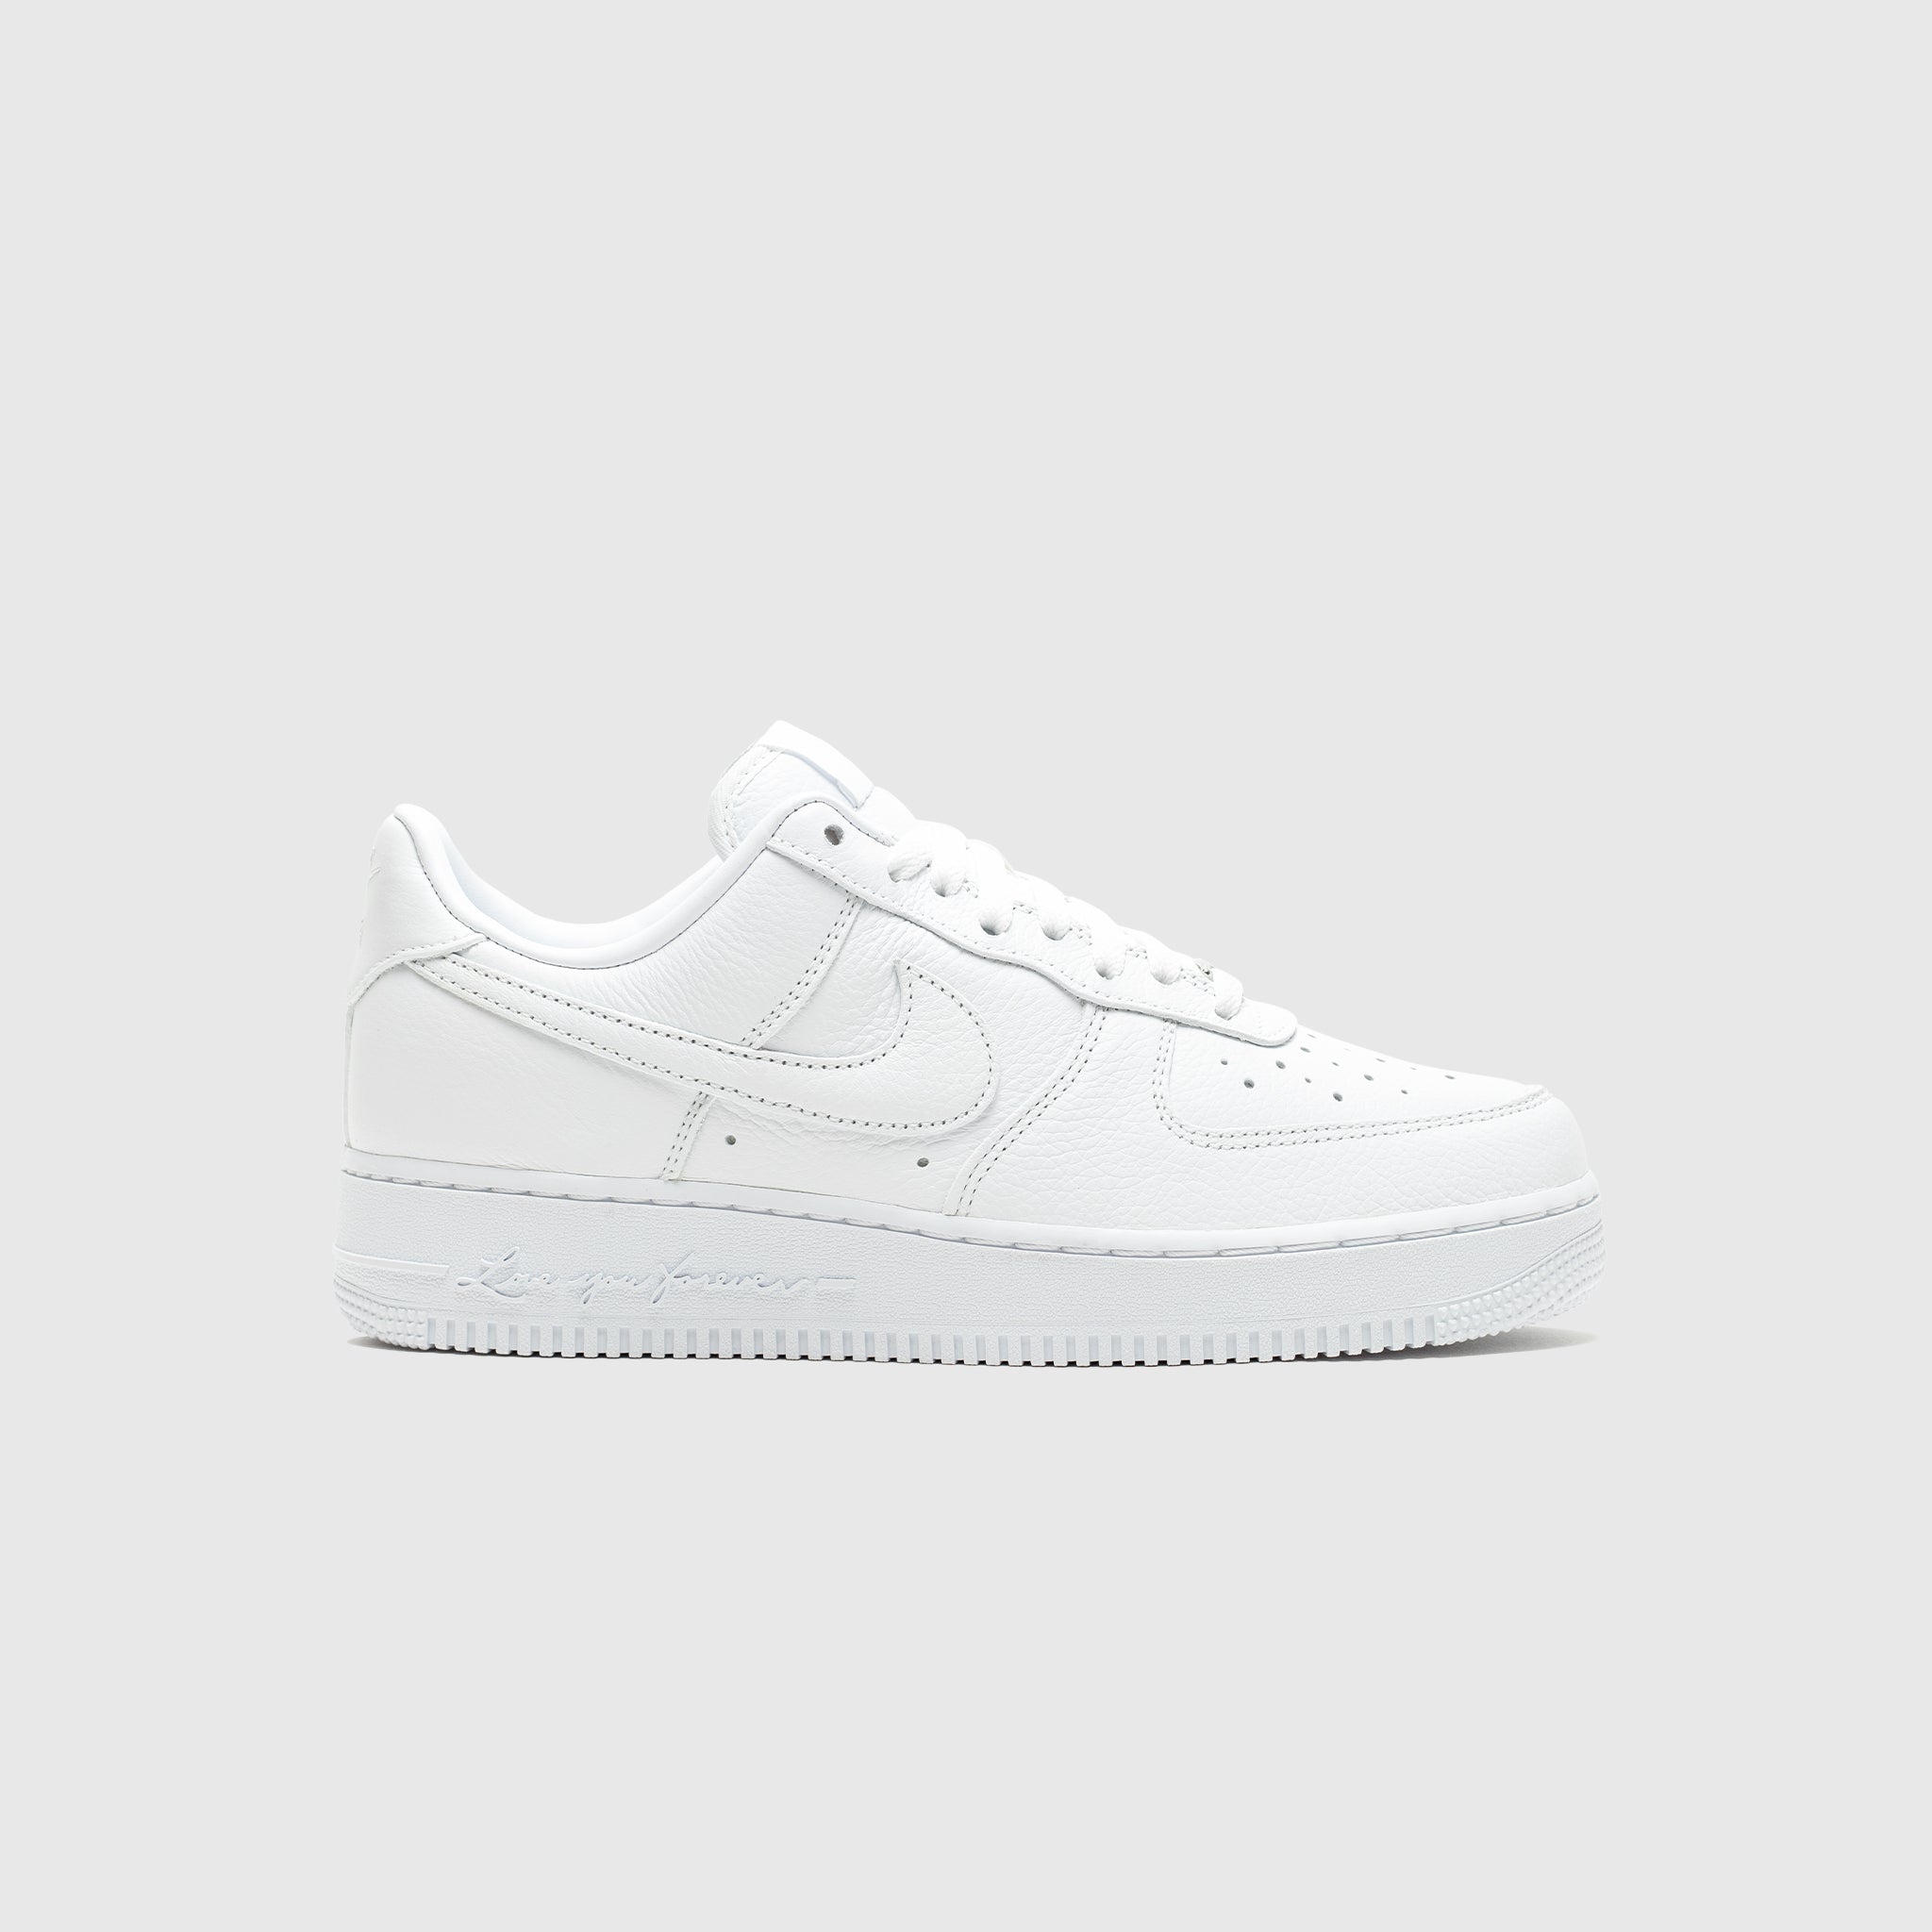 NIKE  NOCTAXAIRFORCE1LOW CERTIFIEDLOVERBOY  CZ8065 100 FRONT